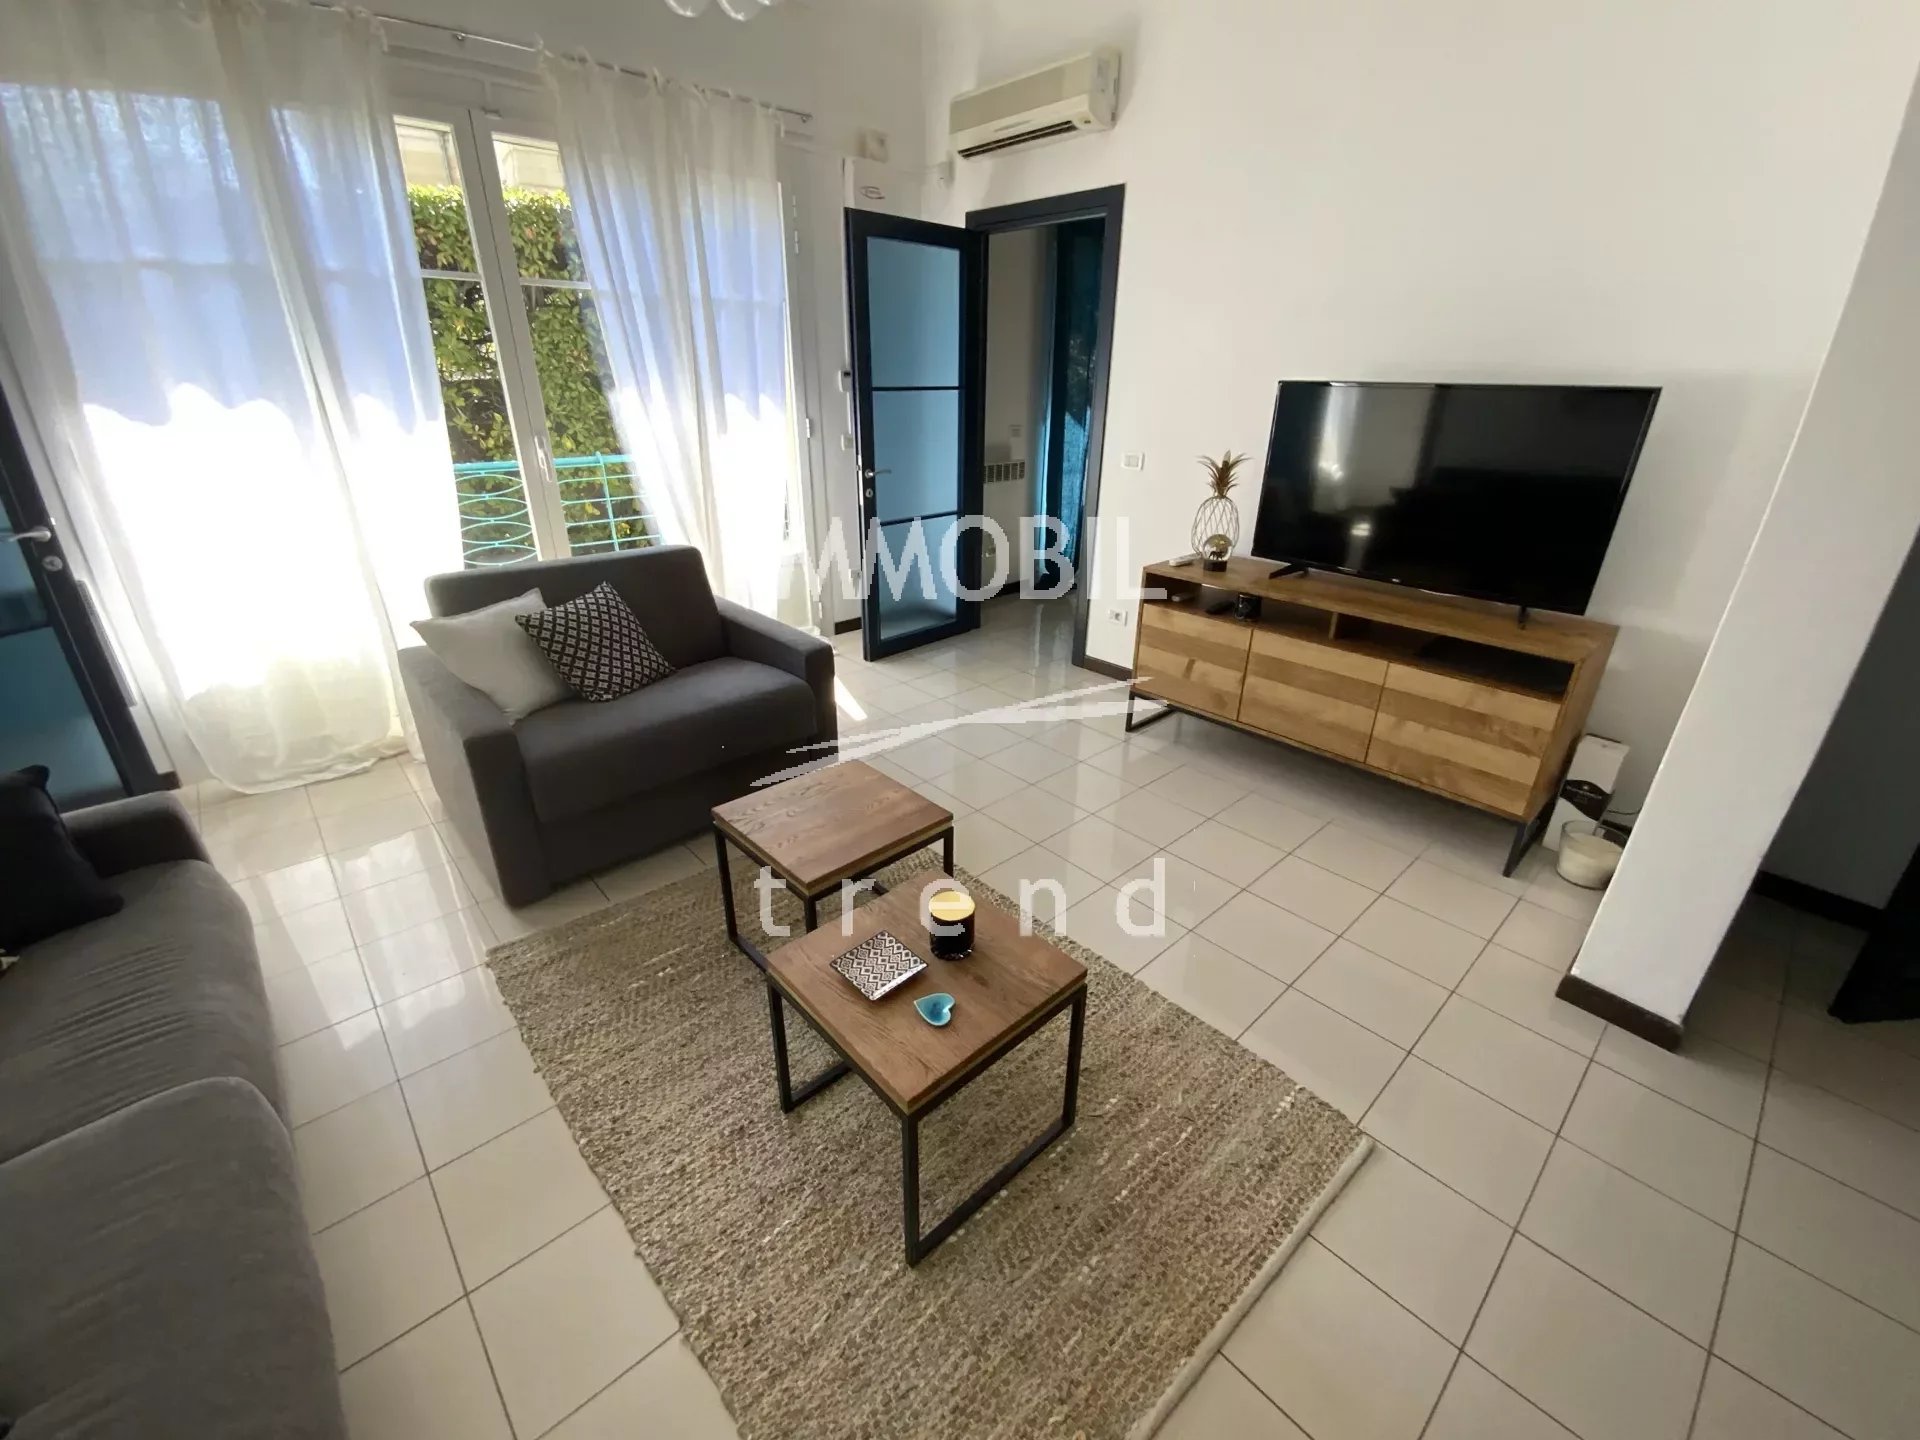 SOLE AGENT Menton Madone - 2 bedroom apartment with balcony for sale